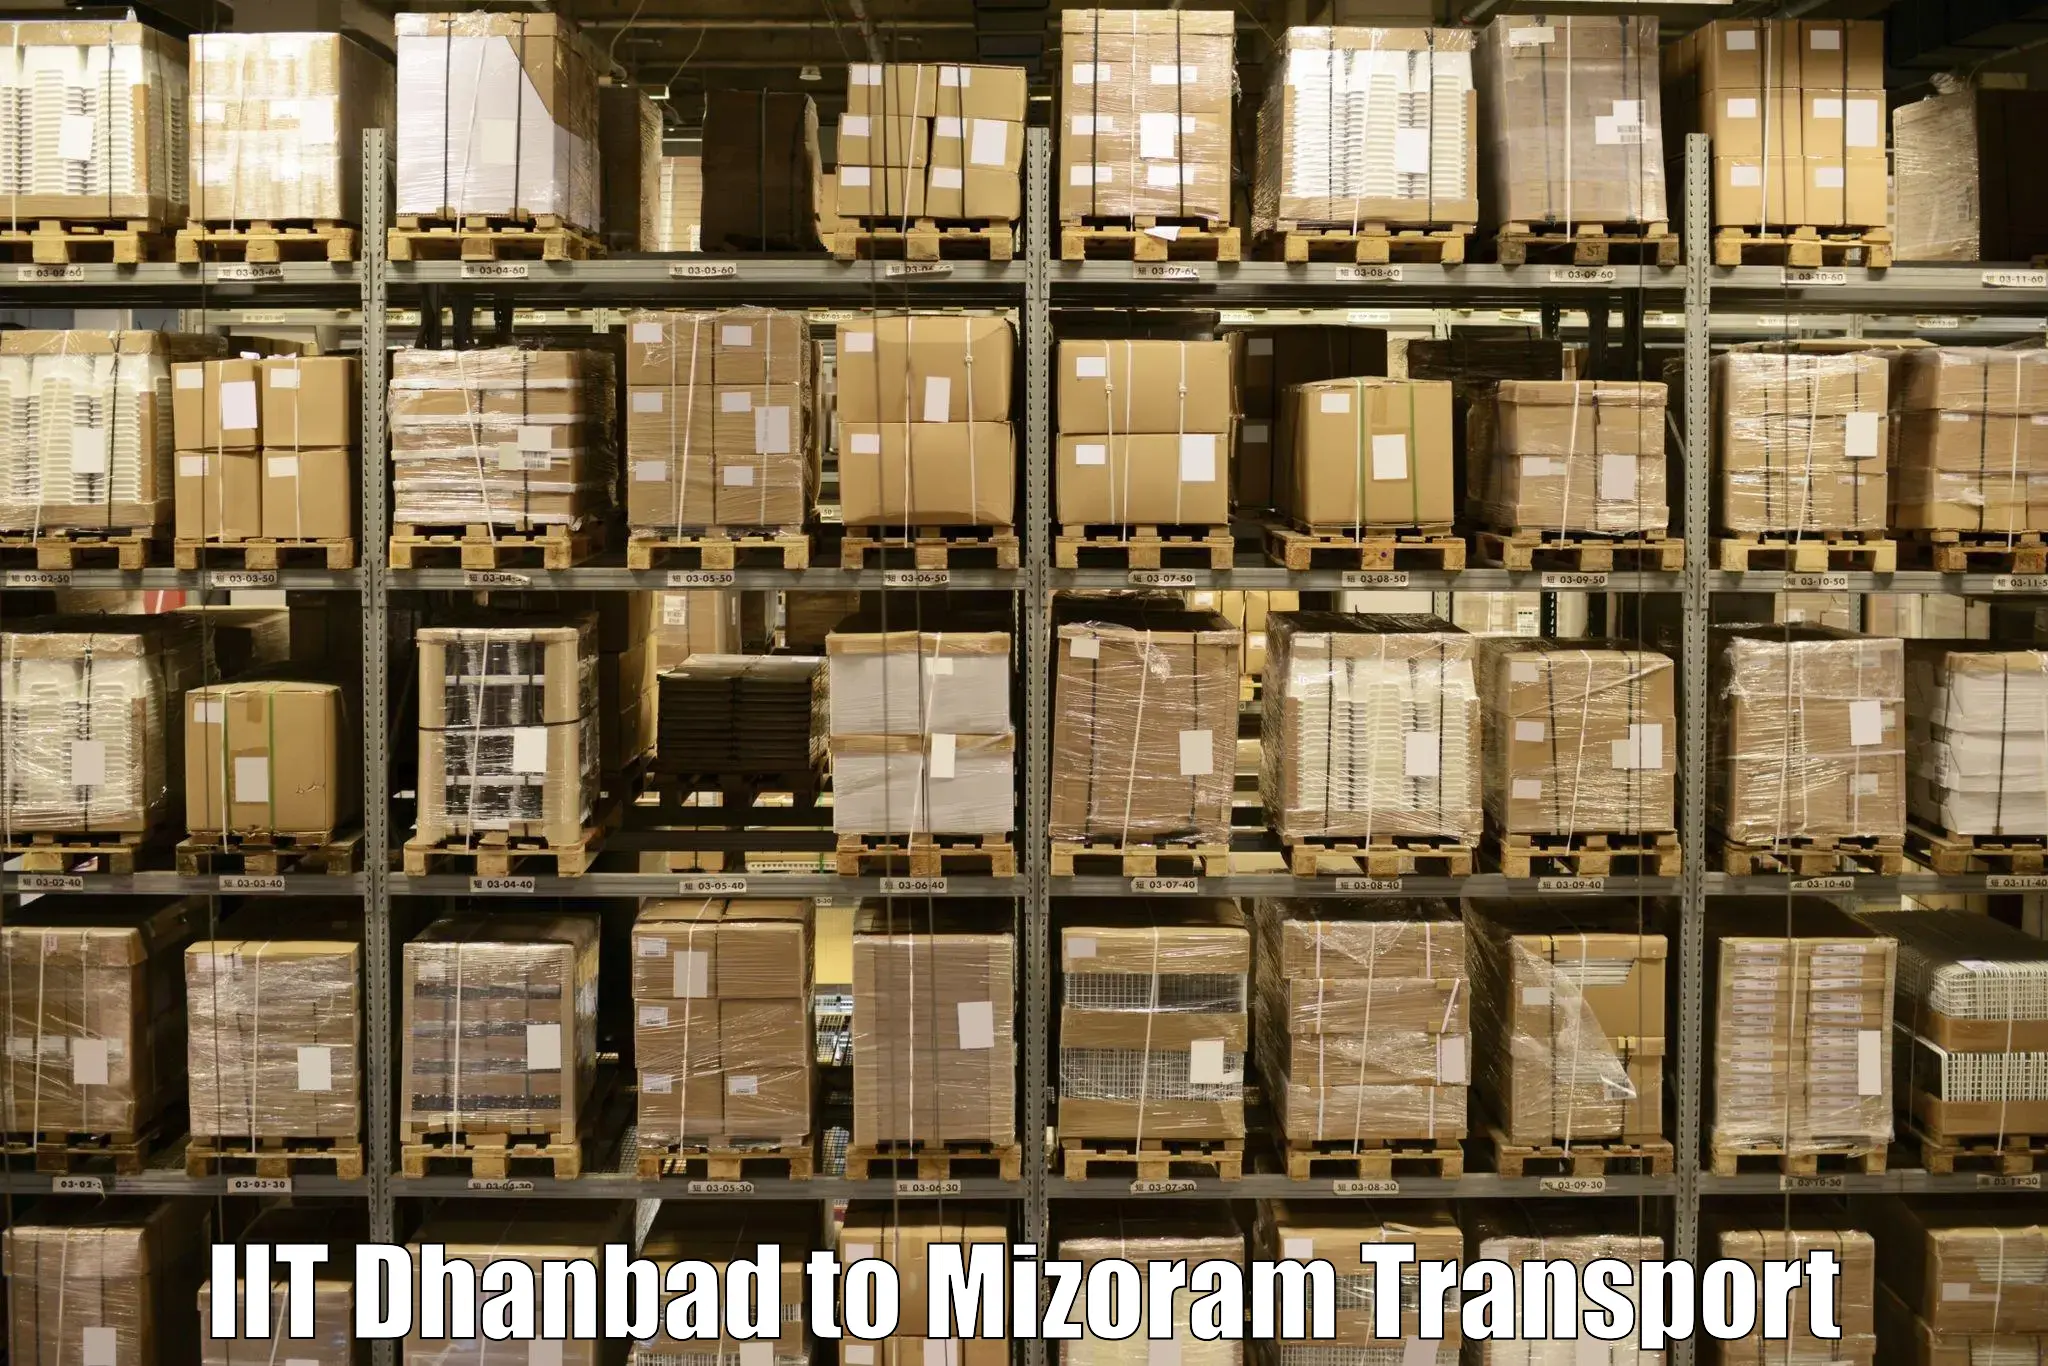 Express transport services in IIT Dhanbad to Siaha